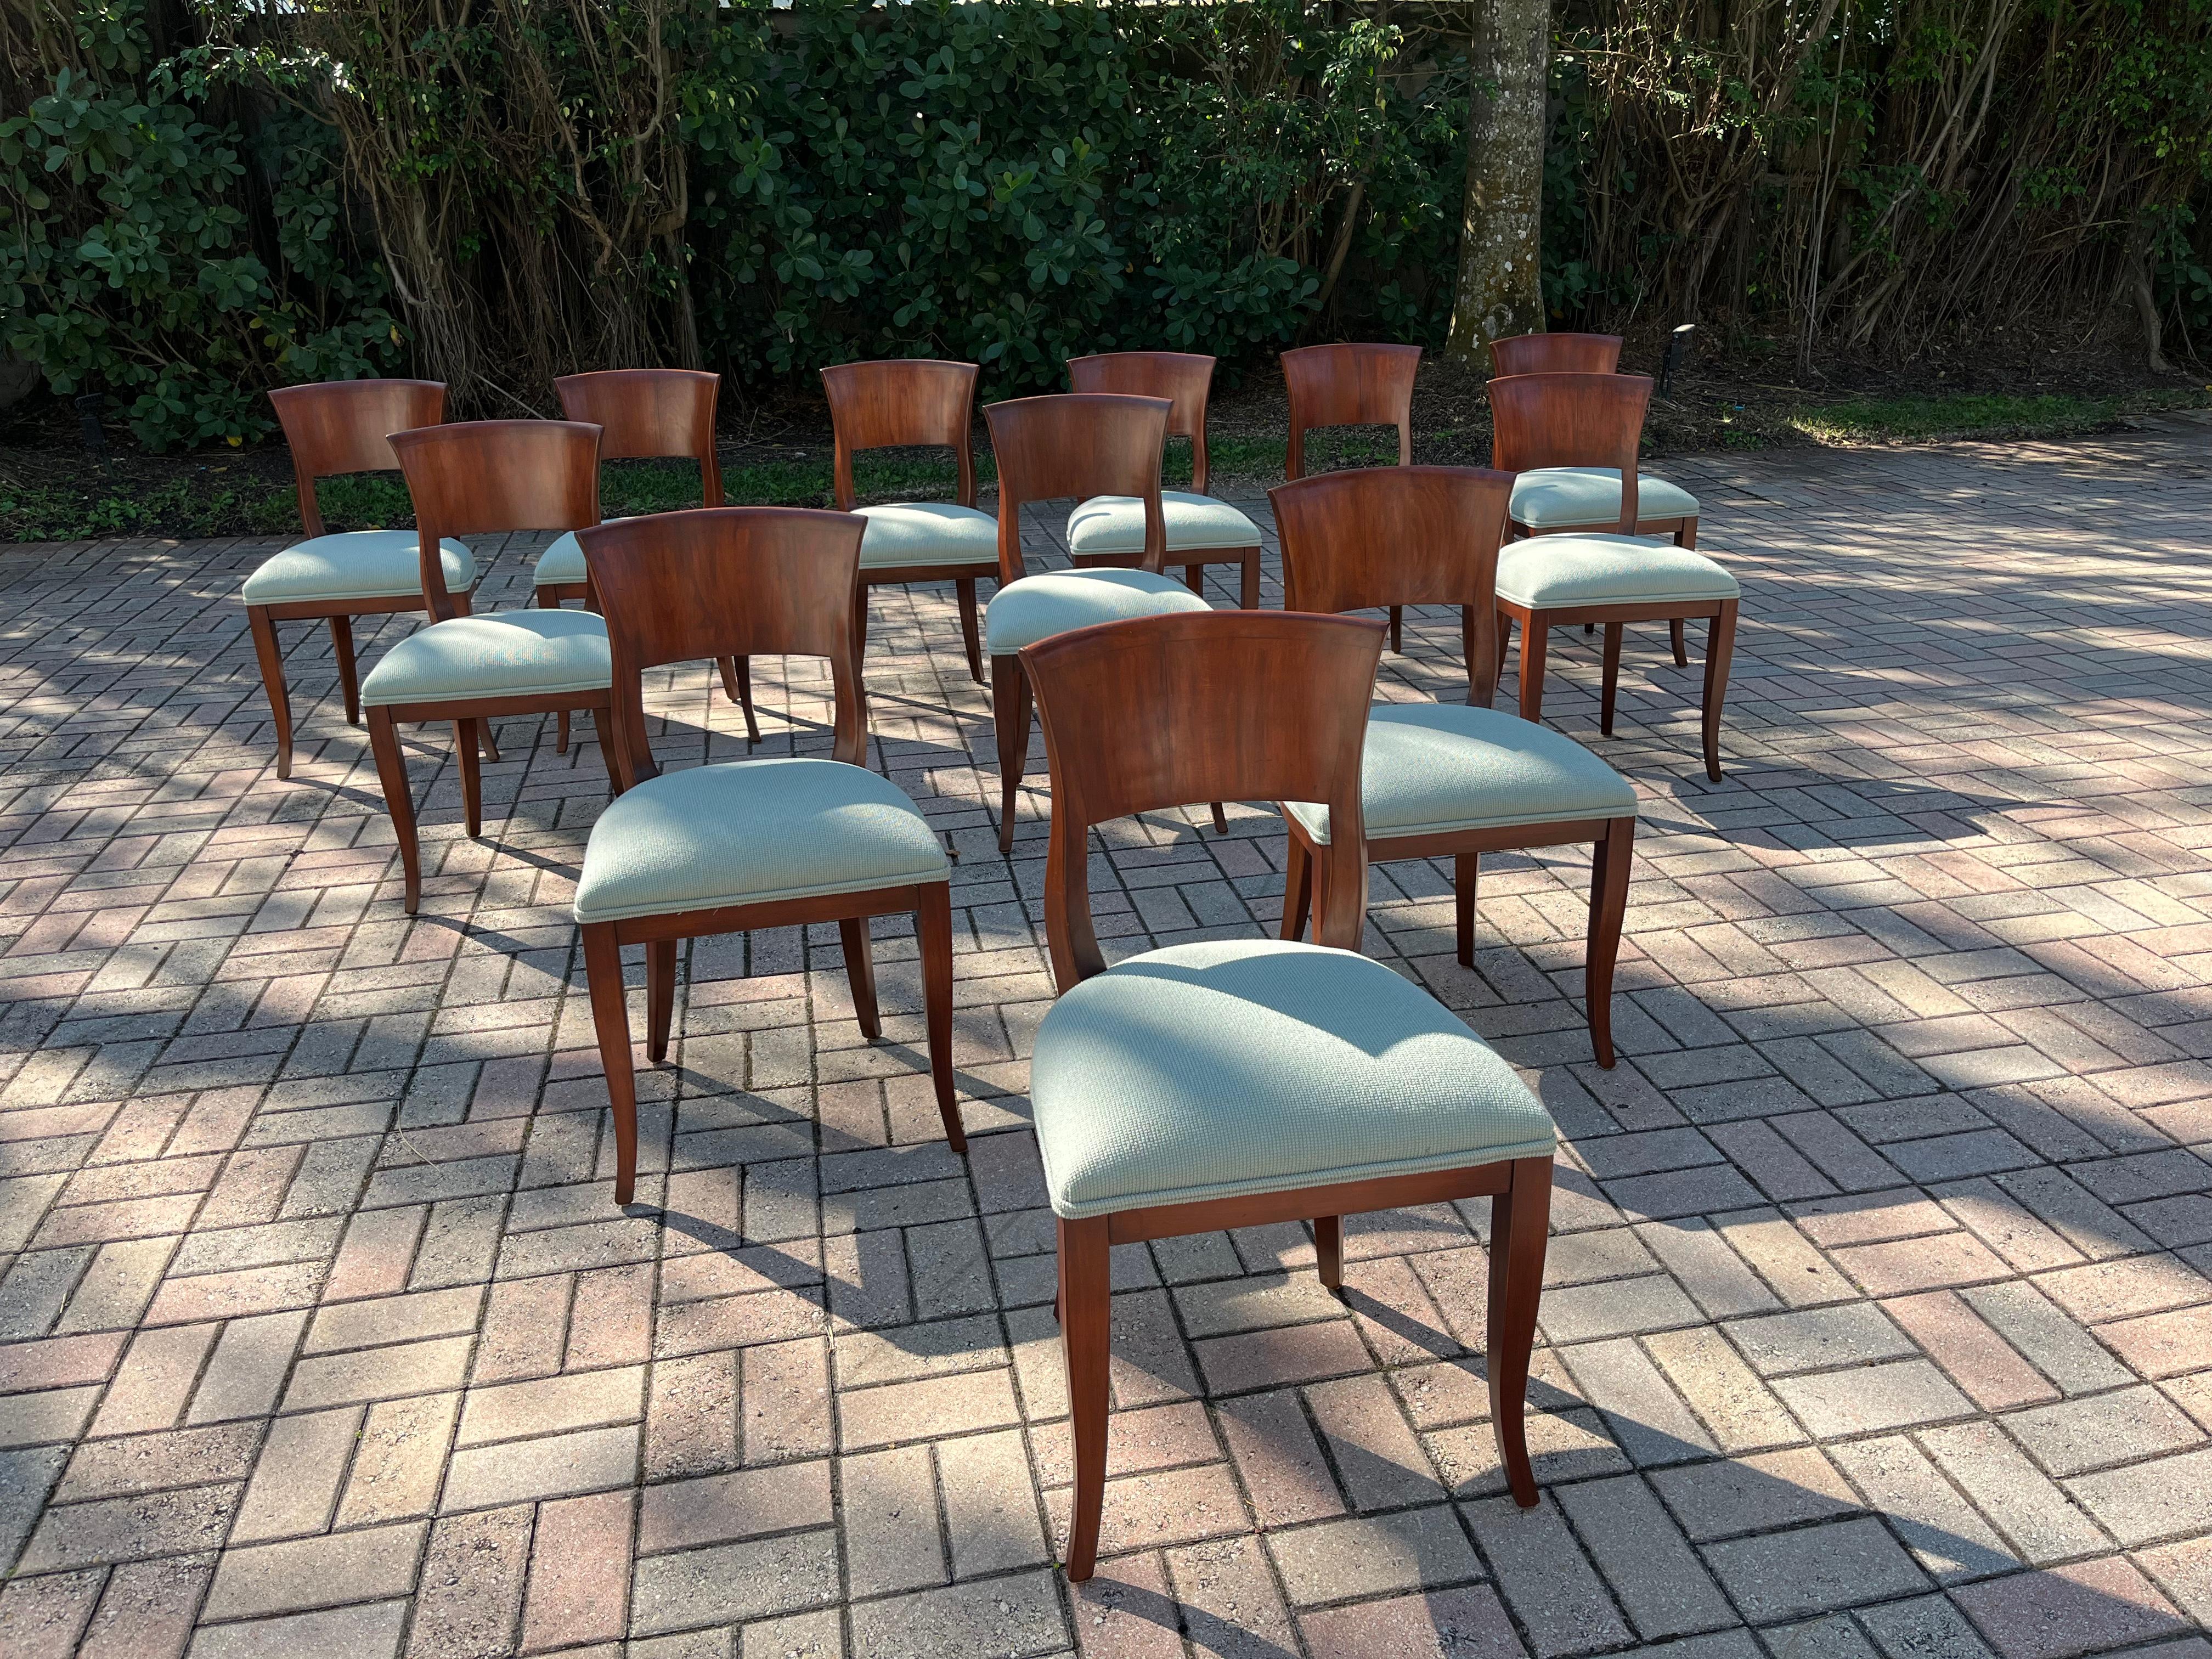 Set of twelve dining chairs, solid wood and fabric. Ready for a new home.